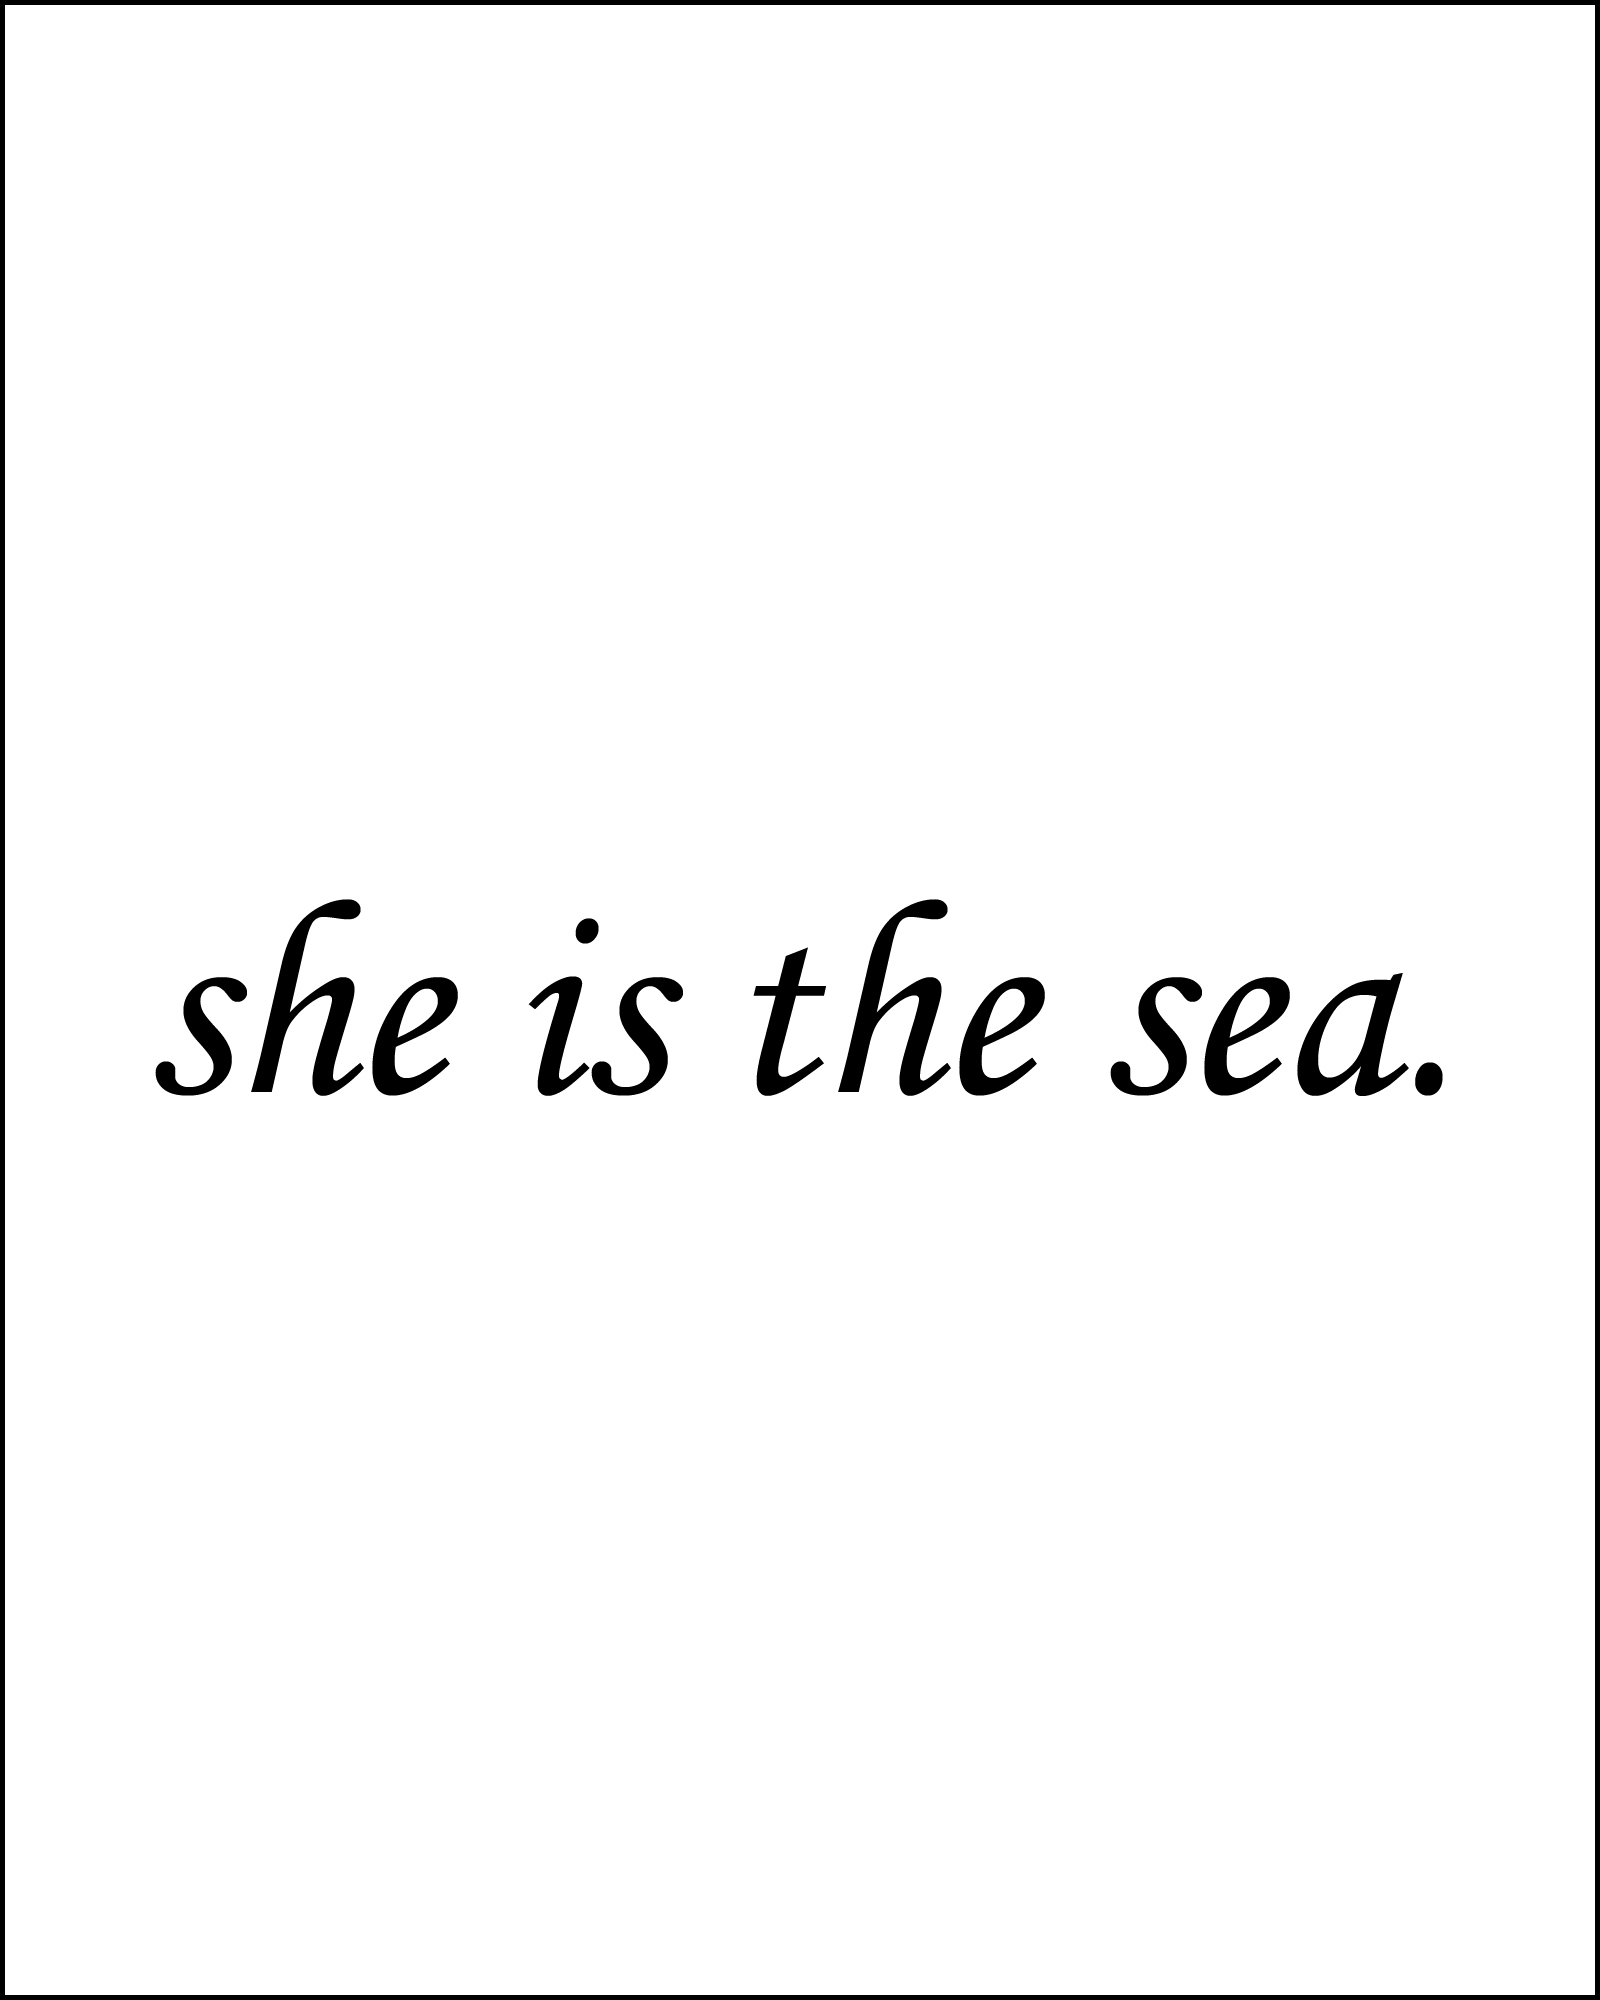 she is the sea.